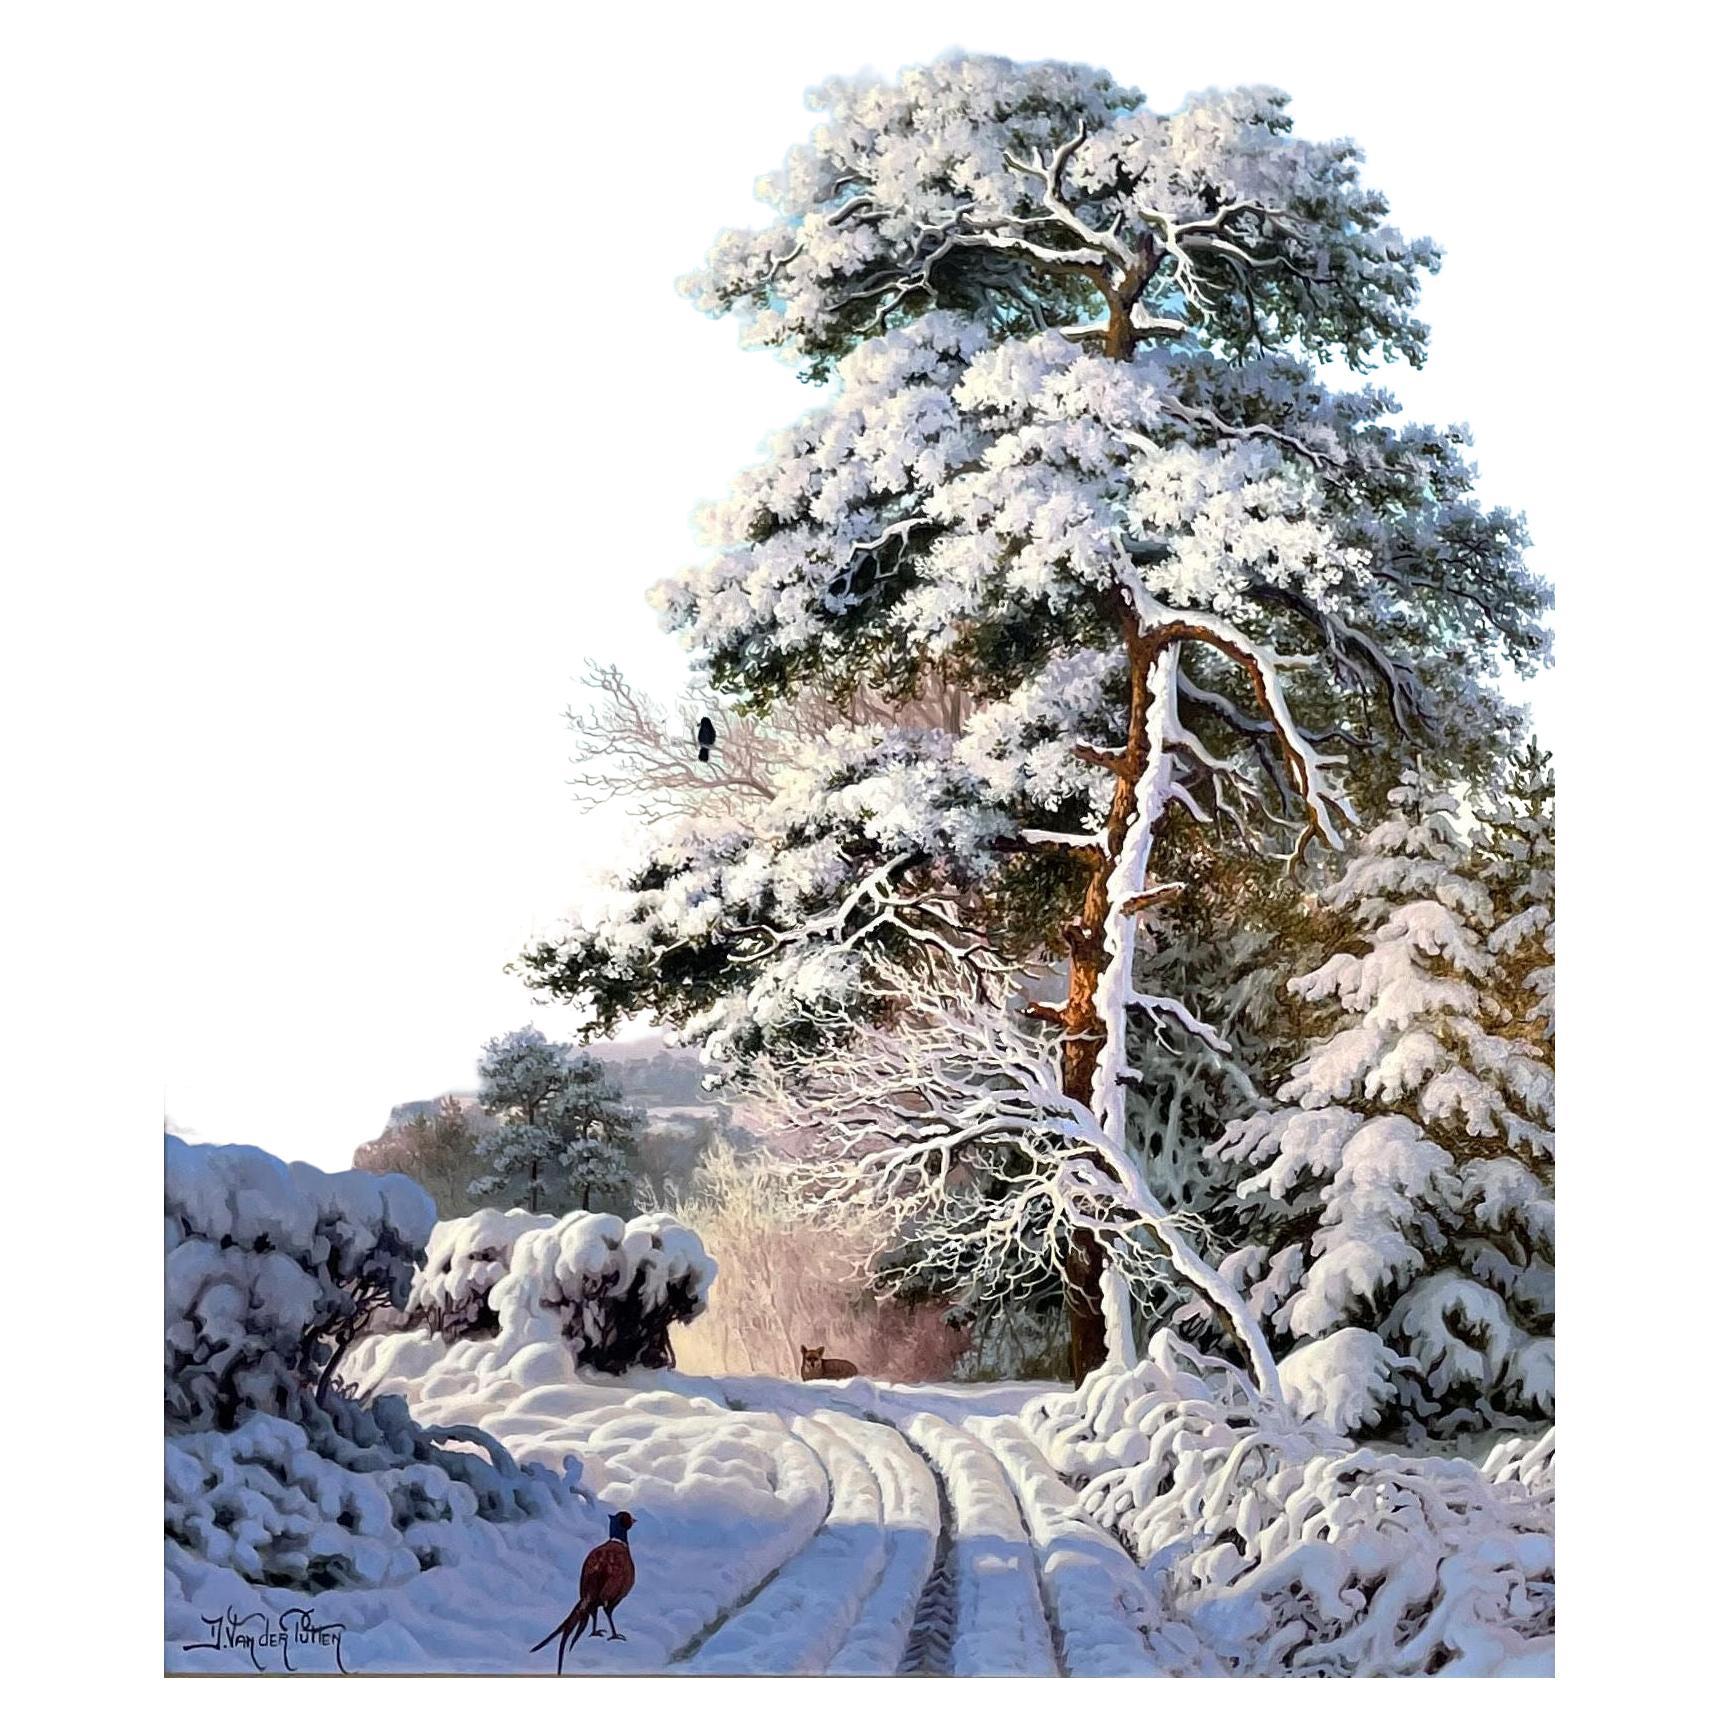 Superb painting by Daniel Van der Putten, depicting a wonderful rural snow scene, a snow-covered dirt road with a tall snow-covered towering tree on a hillside and alone peacock on the ground in the village of Hollywood in County Wicklow, Ireland.